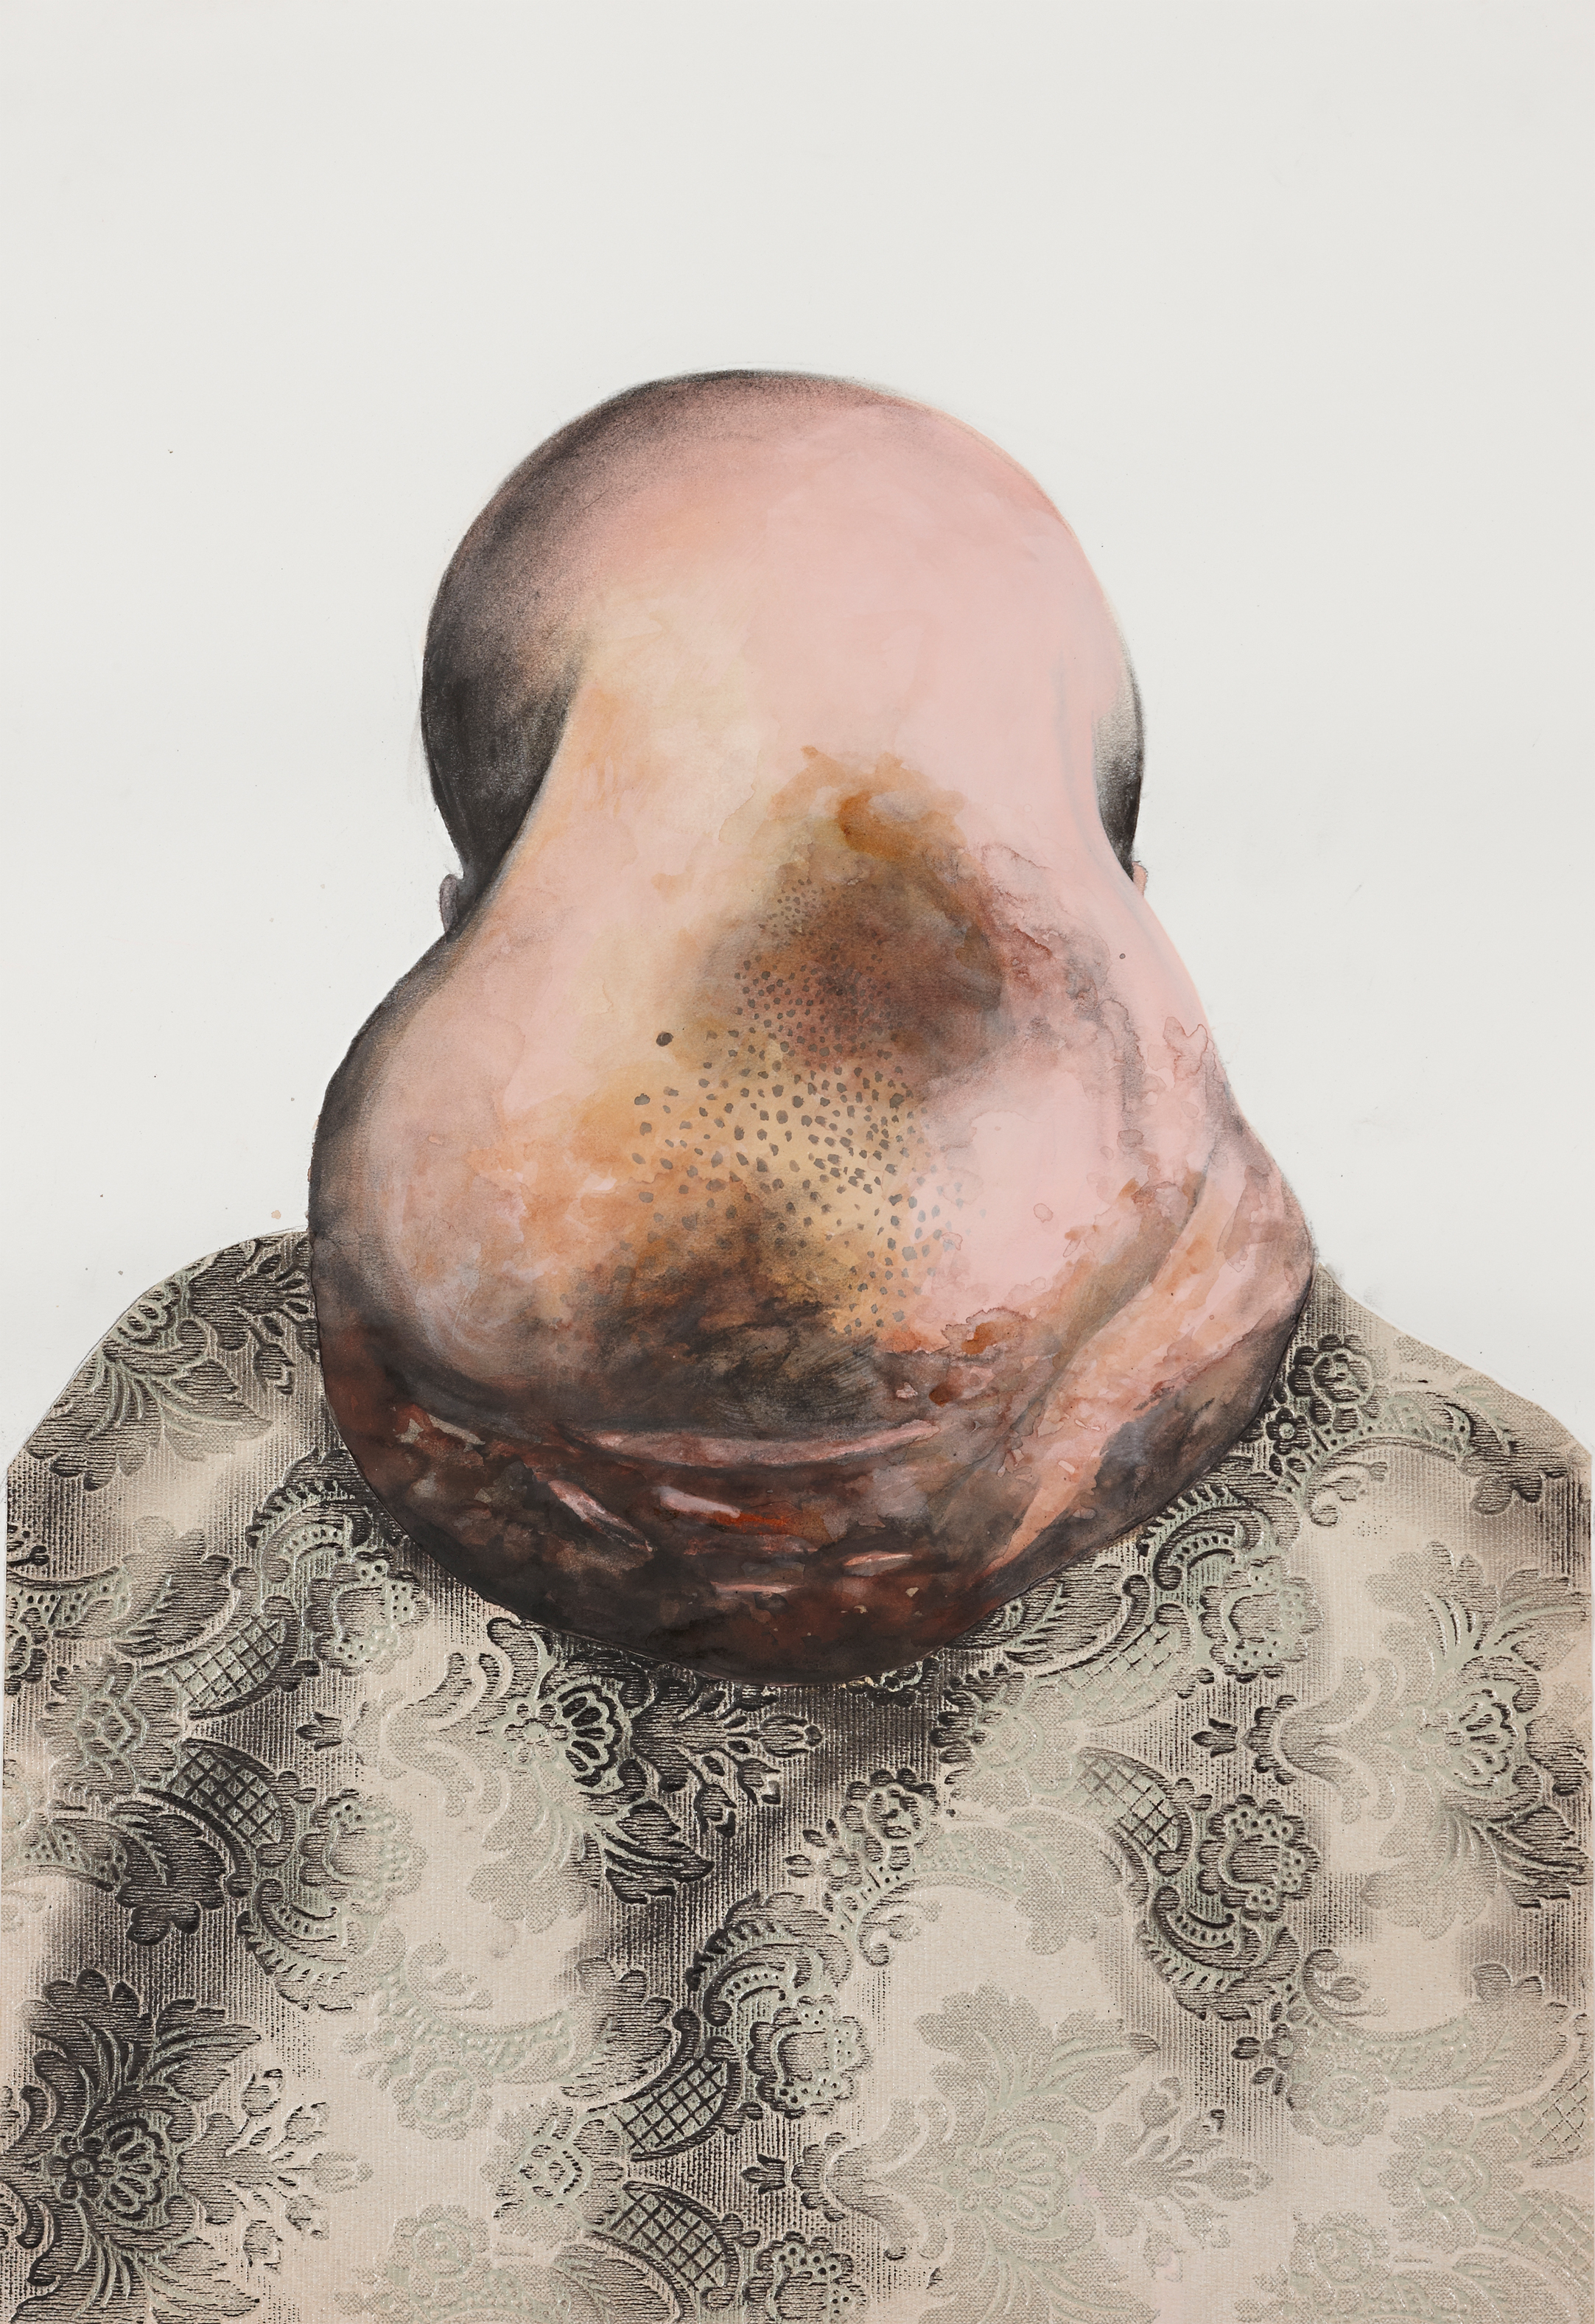 Man with large lump on head